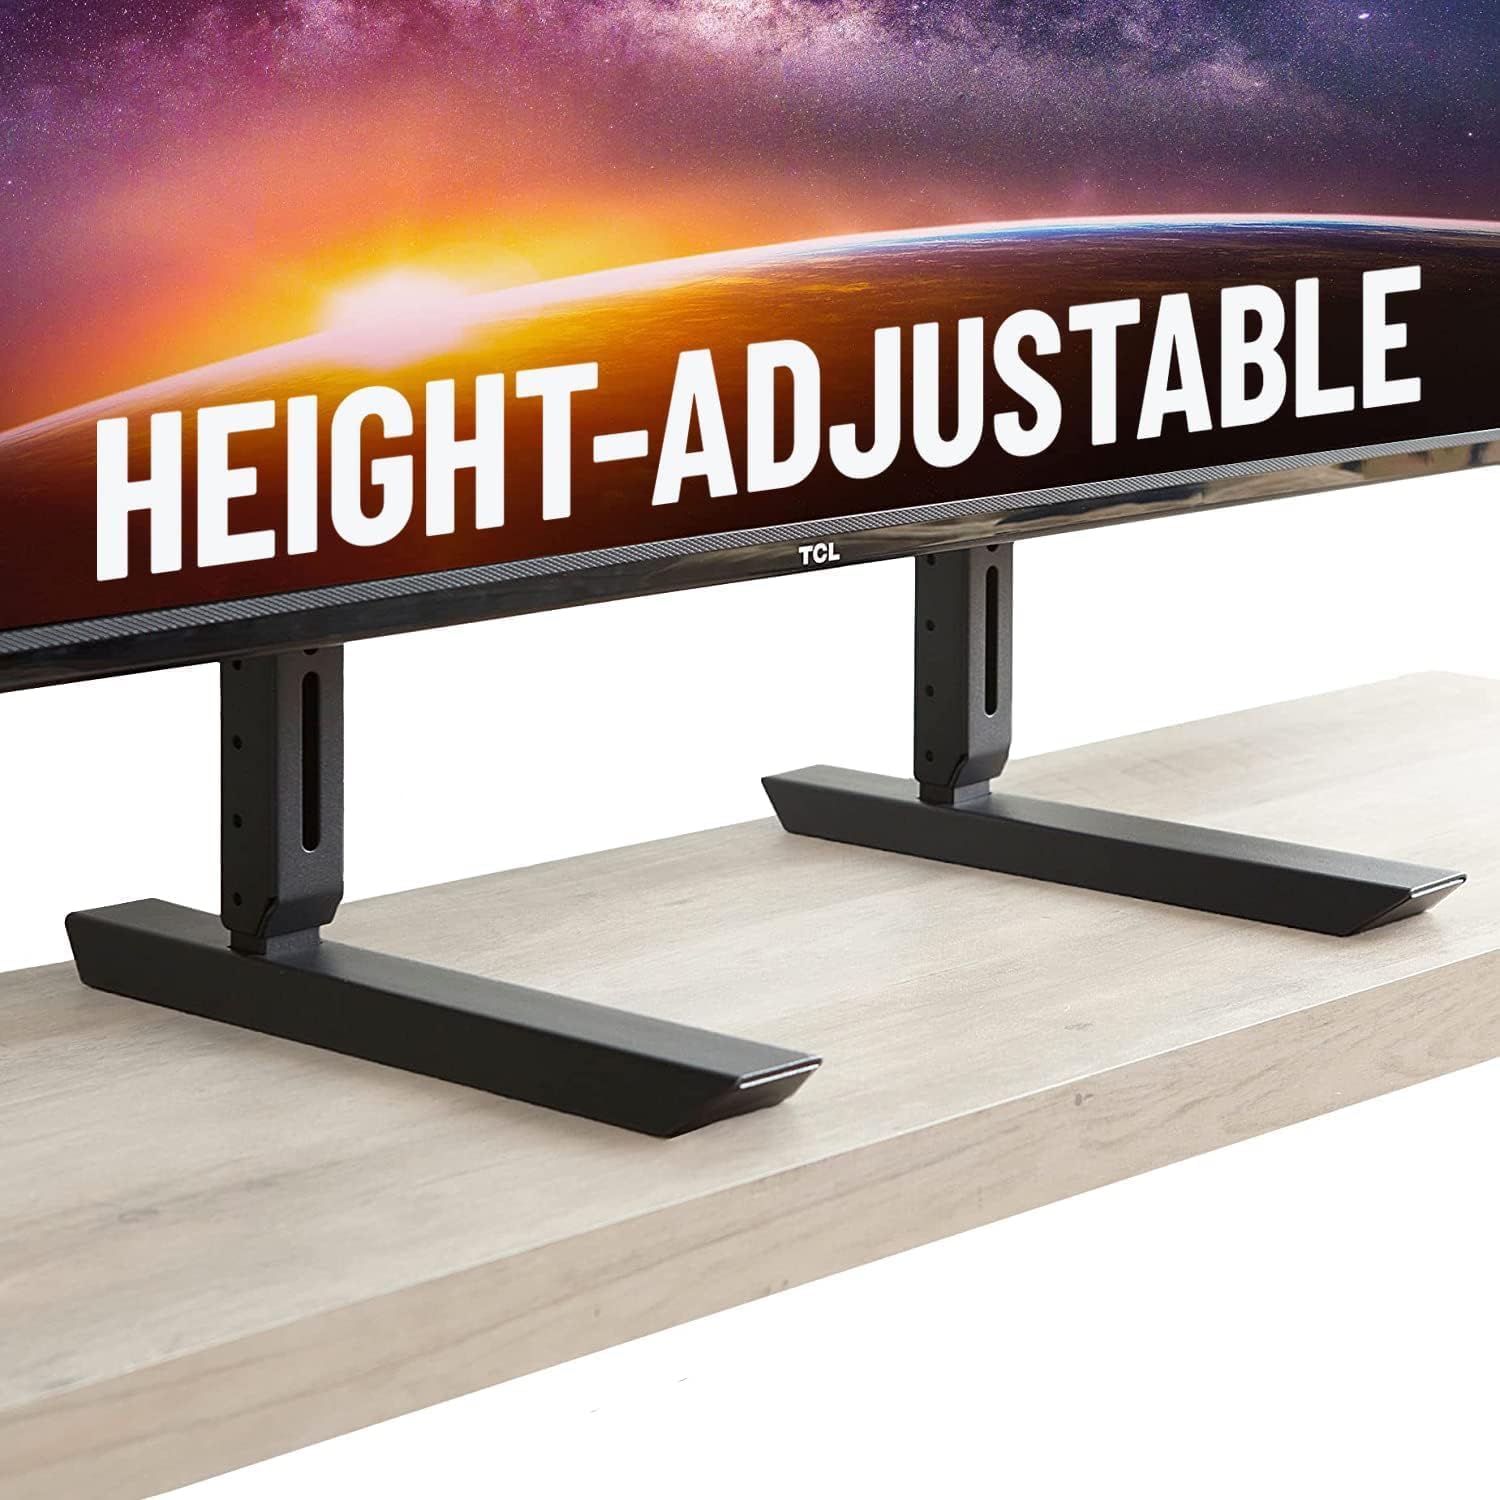 ECHOGEAR Universal Large Stand - Height Adjustable Base for TVs Up to 77 - Wobble-Free Replacement Stand Works w/Any TV Including Vizio, TCL, Samsung & More - Flat Design Compatible w/Soundbars